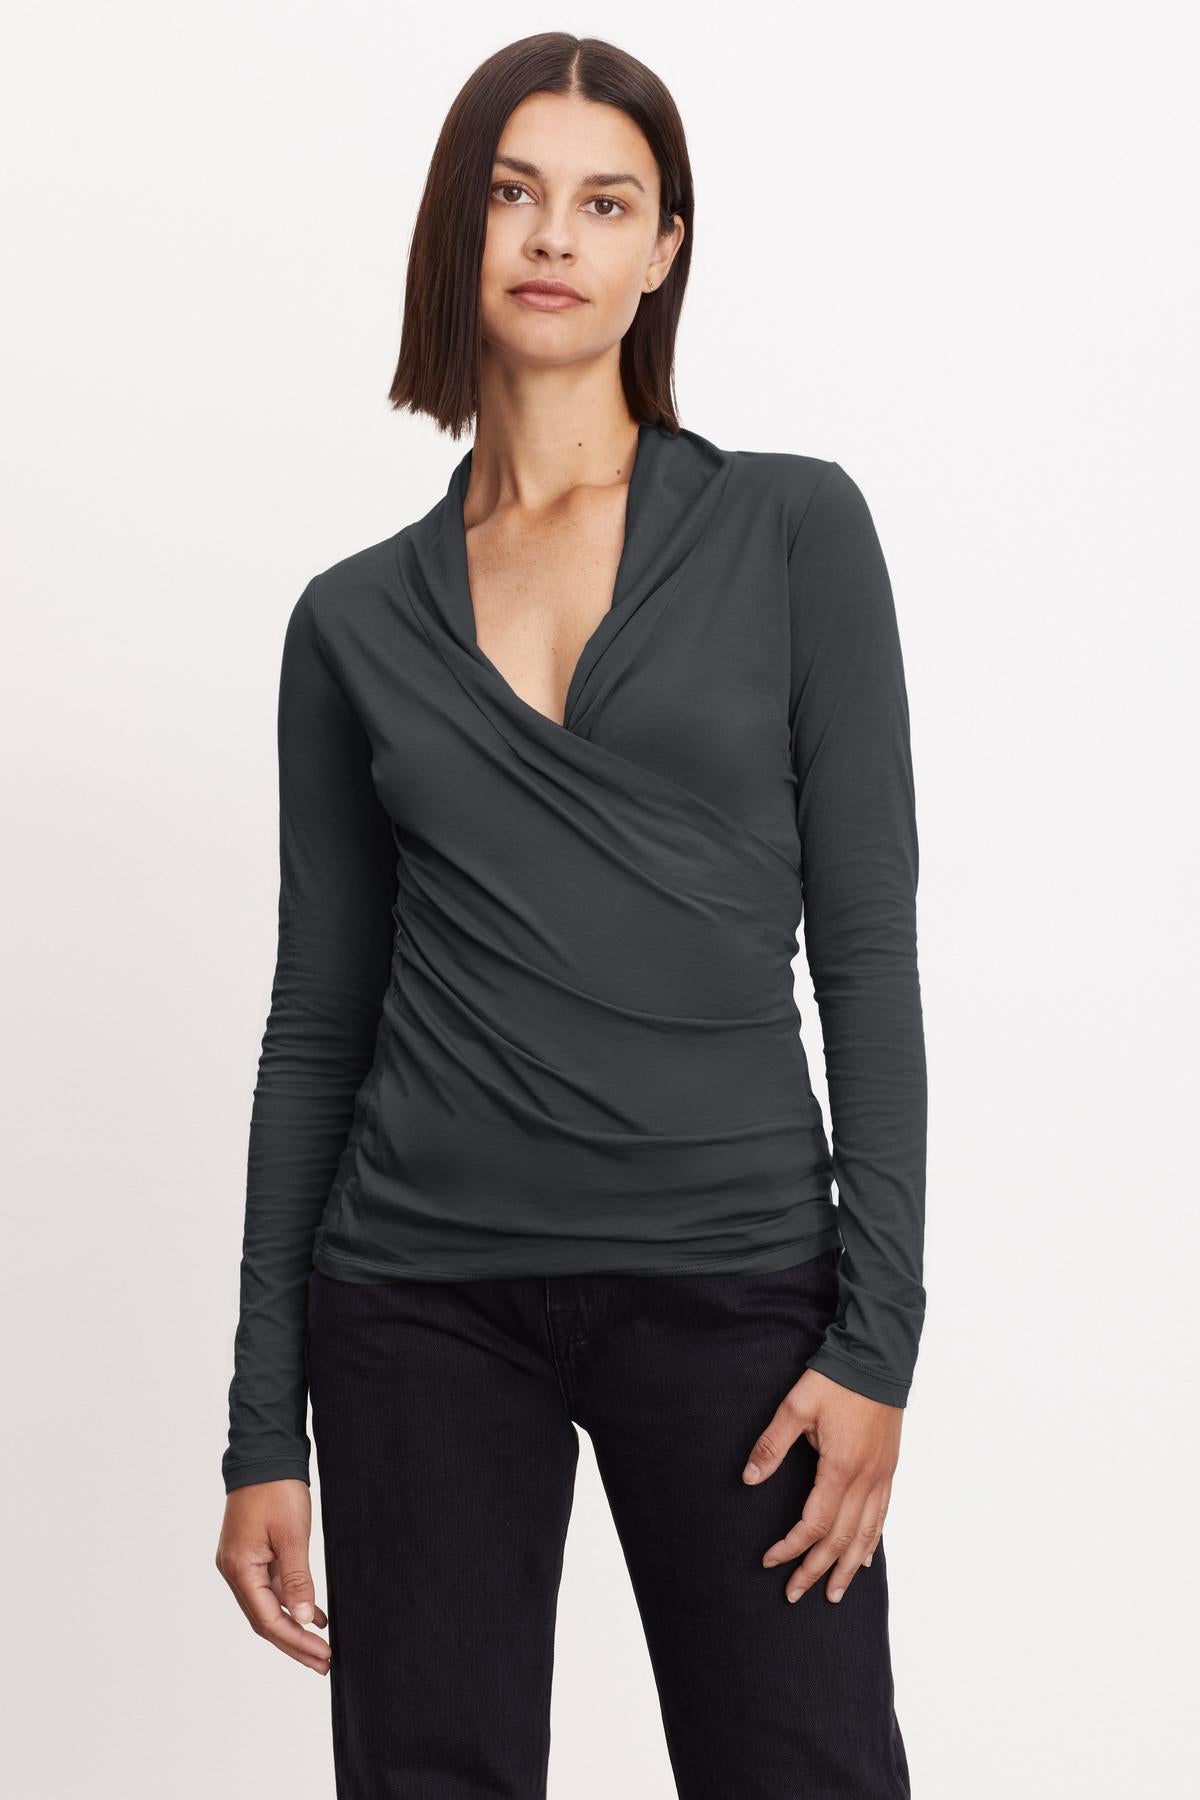 A woman wearing a Velvet by Graham & Spencer MERI WRAP FRONT FITTED TOP, grey long-sleeved top.-35783009927361